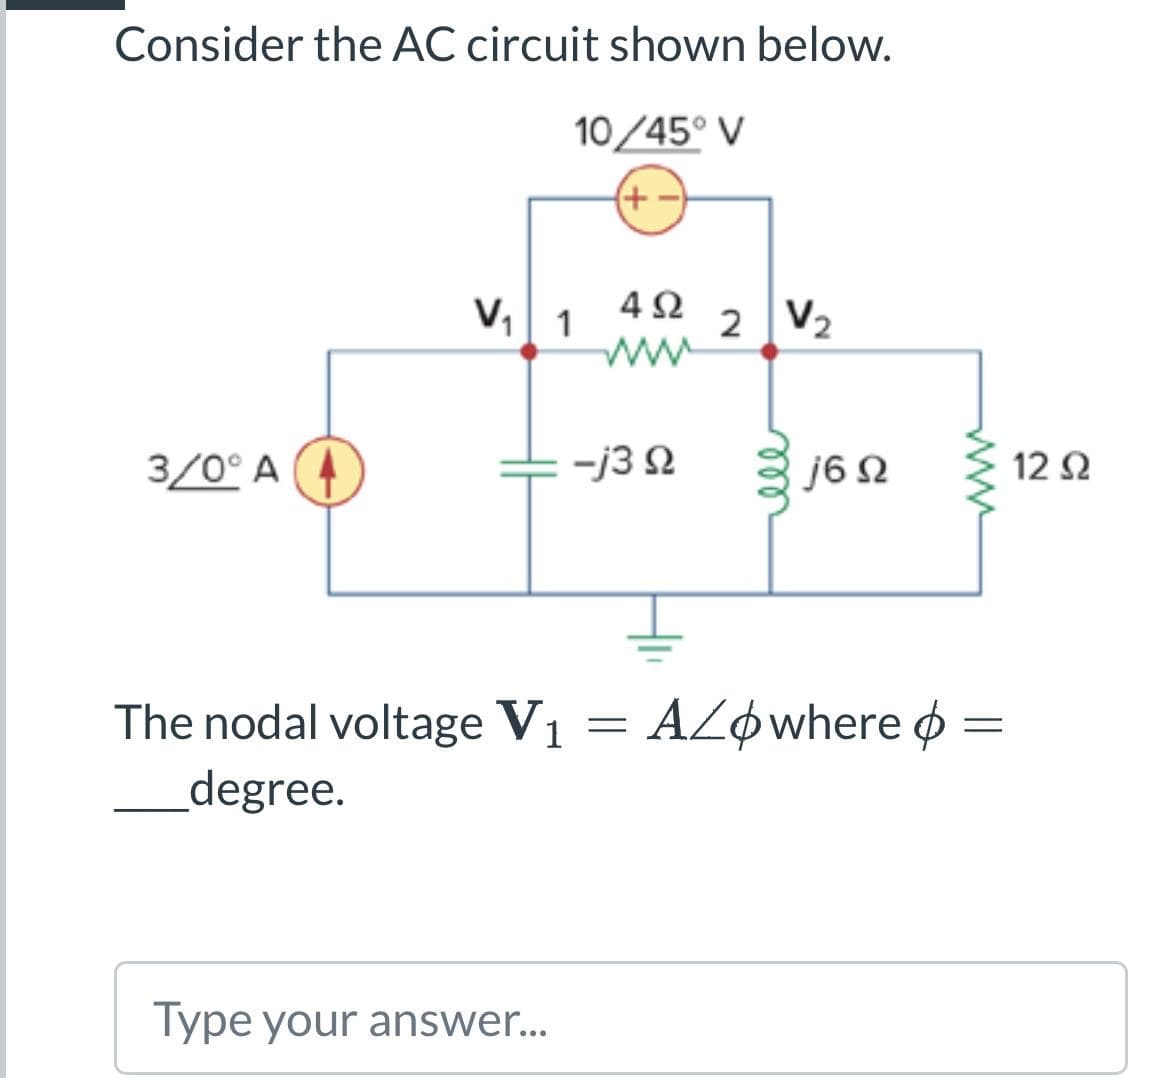 Consider the AC circuit shown below.
3/0° A
V₁1
The nodal voltage V₁
degree.
10/45° V
(+-
Type your answer...
492 2 V₂
www
-j3 92
1 =
| j6 Ω
www
AZOwhere =
12 Ω